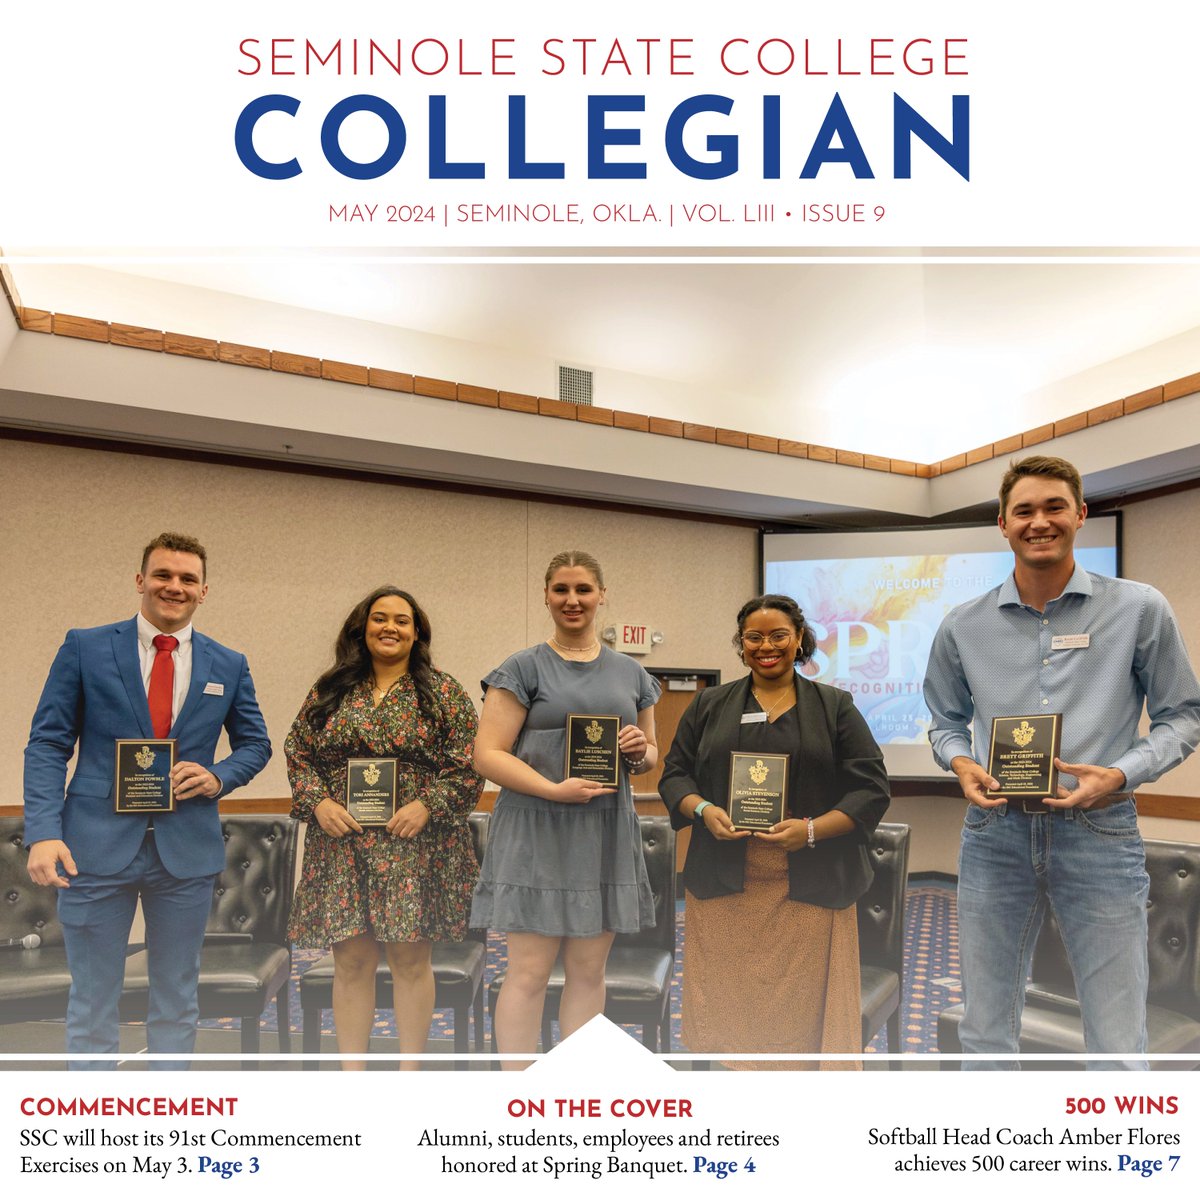 The May edition of the Collegian is here! Inside you'll find Coverage of the Spring Recognition Banquet, Softball Coach Amber Flores' 500th career win, commencement details and much more! Read: tinyurl.com/mrxdcv9x